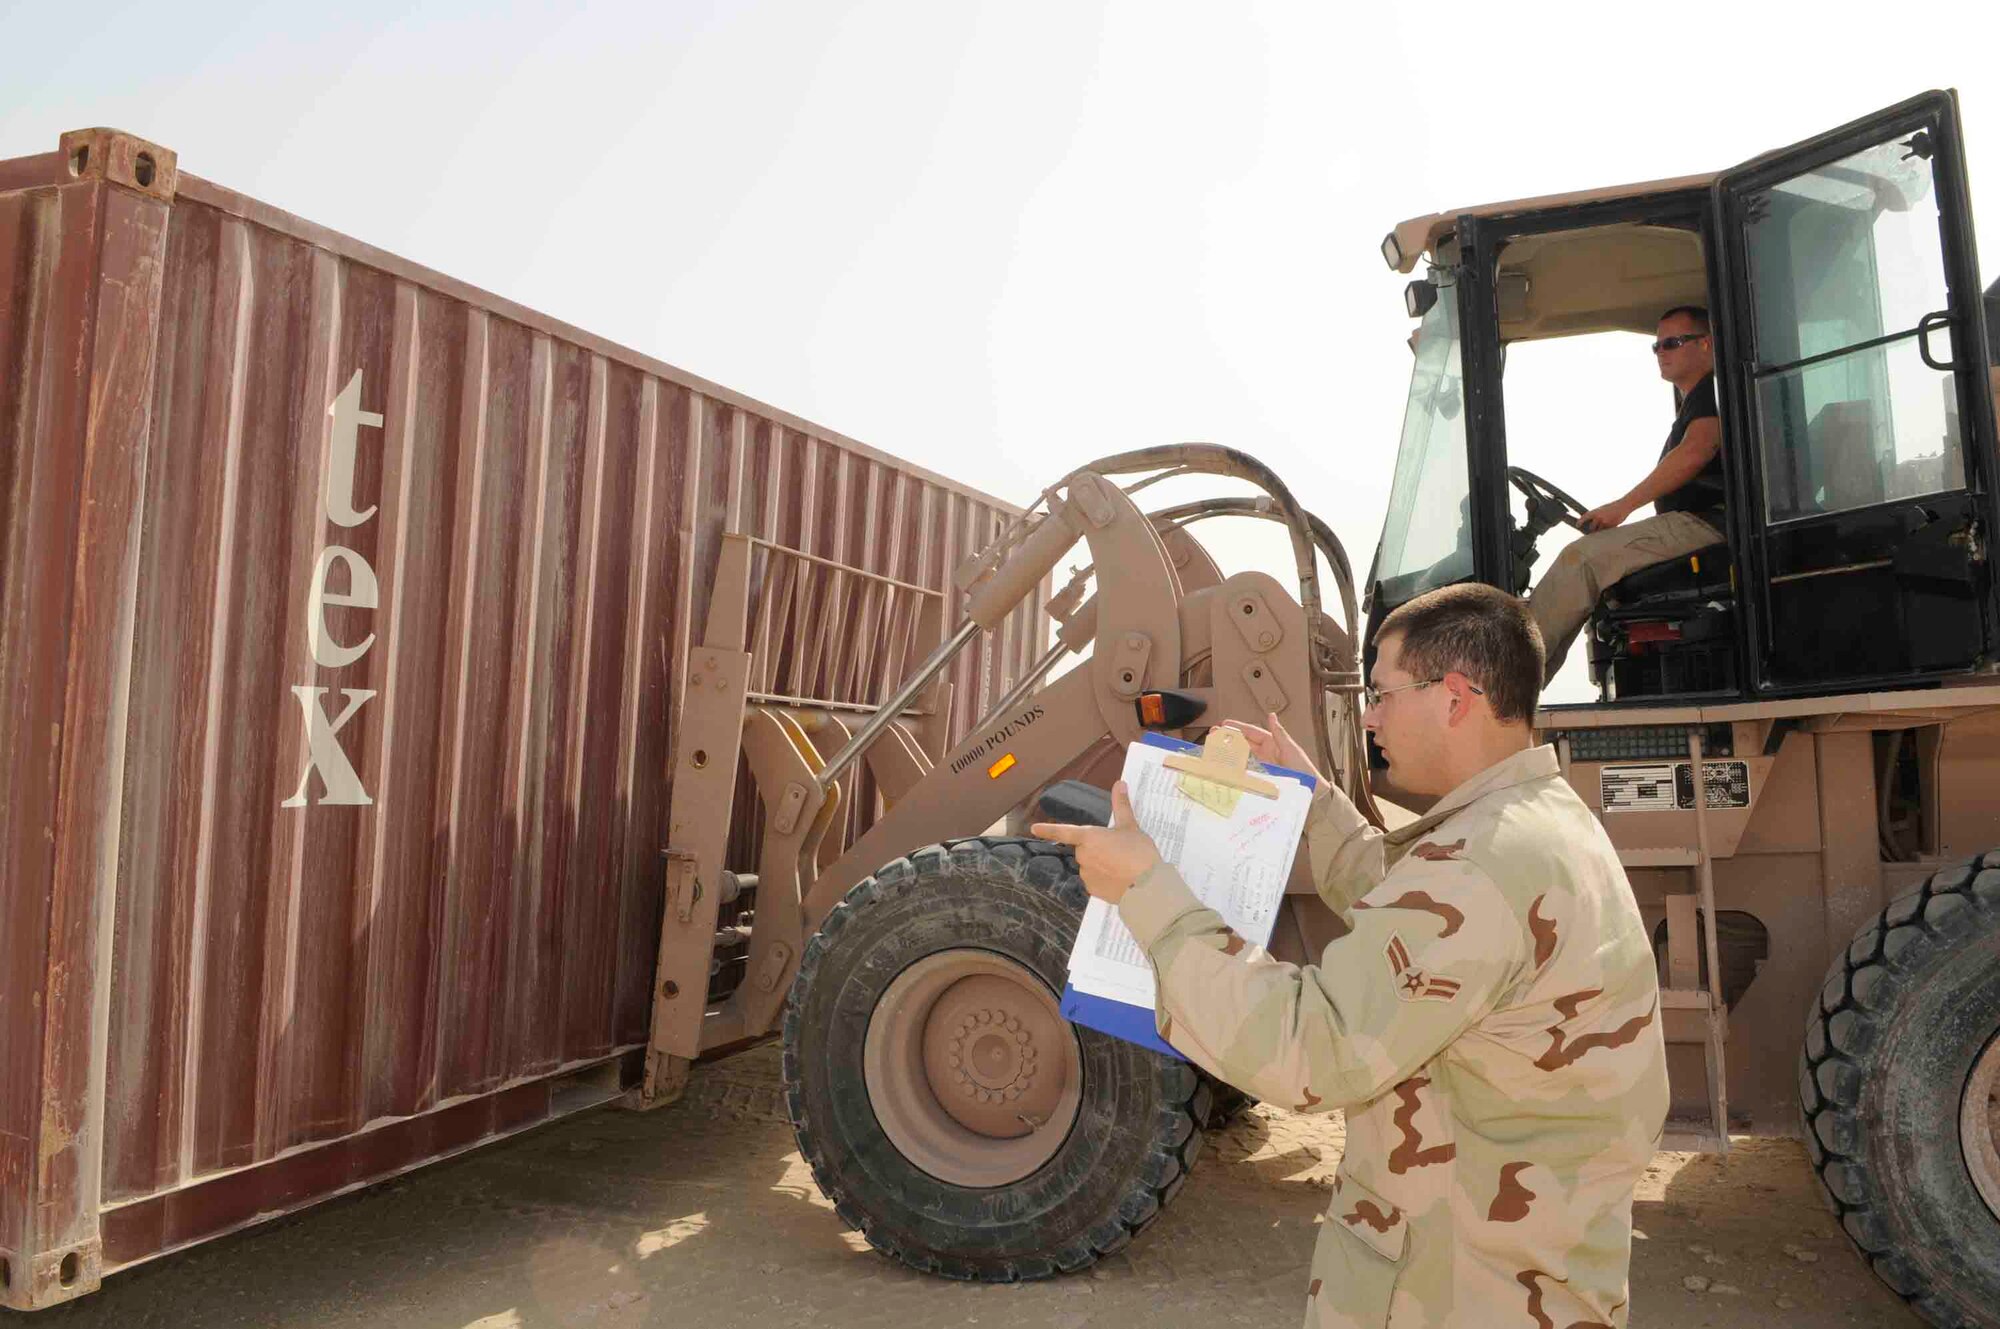 Airman 1st Class Joseph Trevino and Staff Sgt. Maurice Johnson, 379th Expeditionary Logistics Readiness Squadron, guides Chad Swift, DYNA Corporation, while he prepares to load the 3,000-pound container onto a flat bed truck at a Southwest Asia air base April 24. The 379th LRS has removed more than 500 storage containers in less than 60 days.  (U.S. Air Force photo by Tech. Sgt. Johnny Saldivar.)